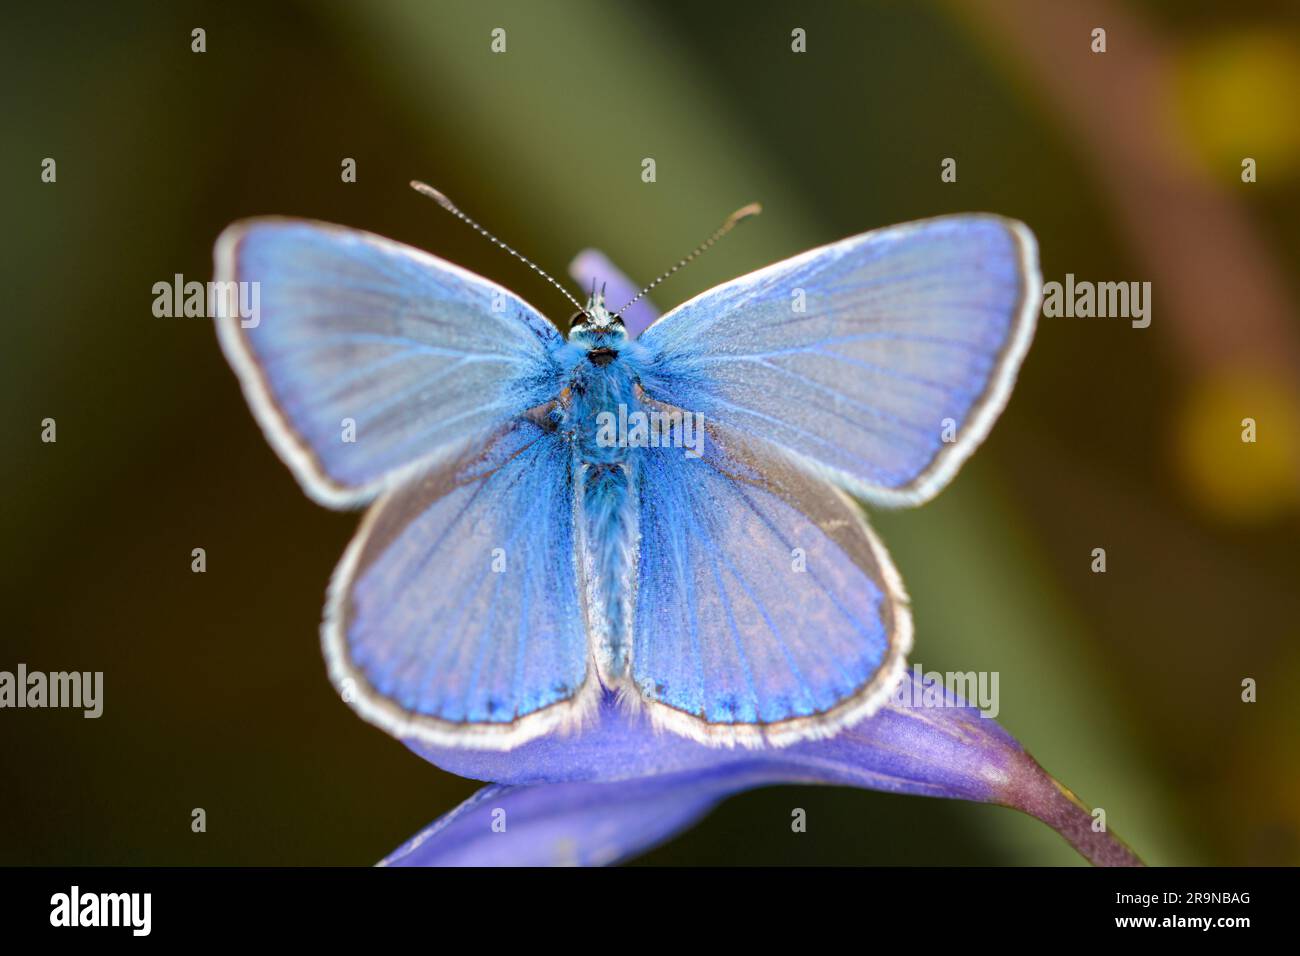 Common blue butterfly or European common blue - Polyommatus icarus - resting on a blue blossom Stock Photo